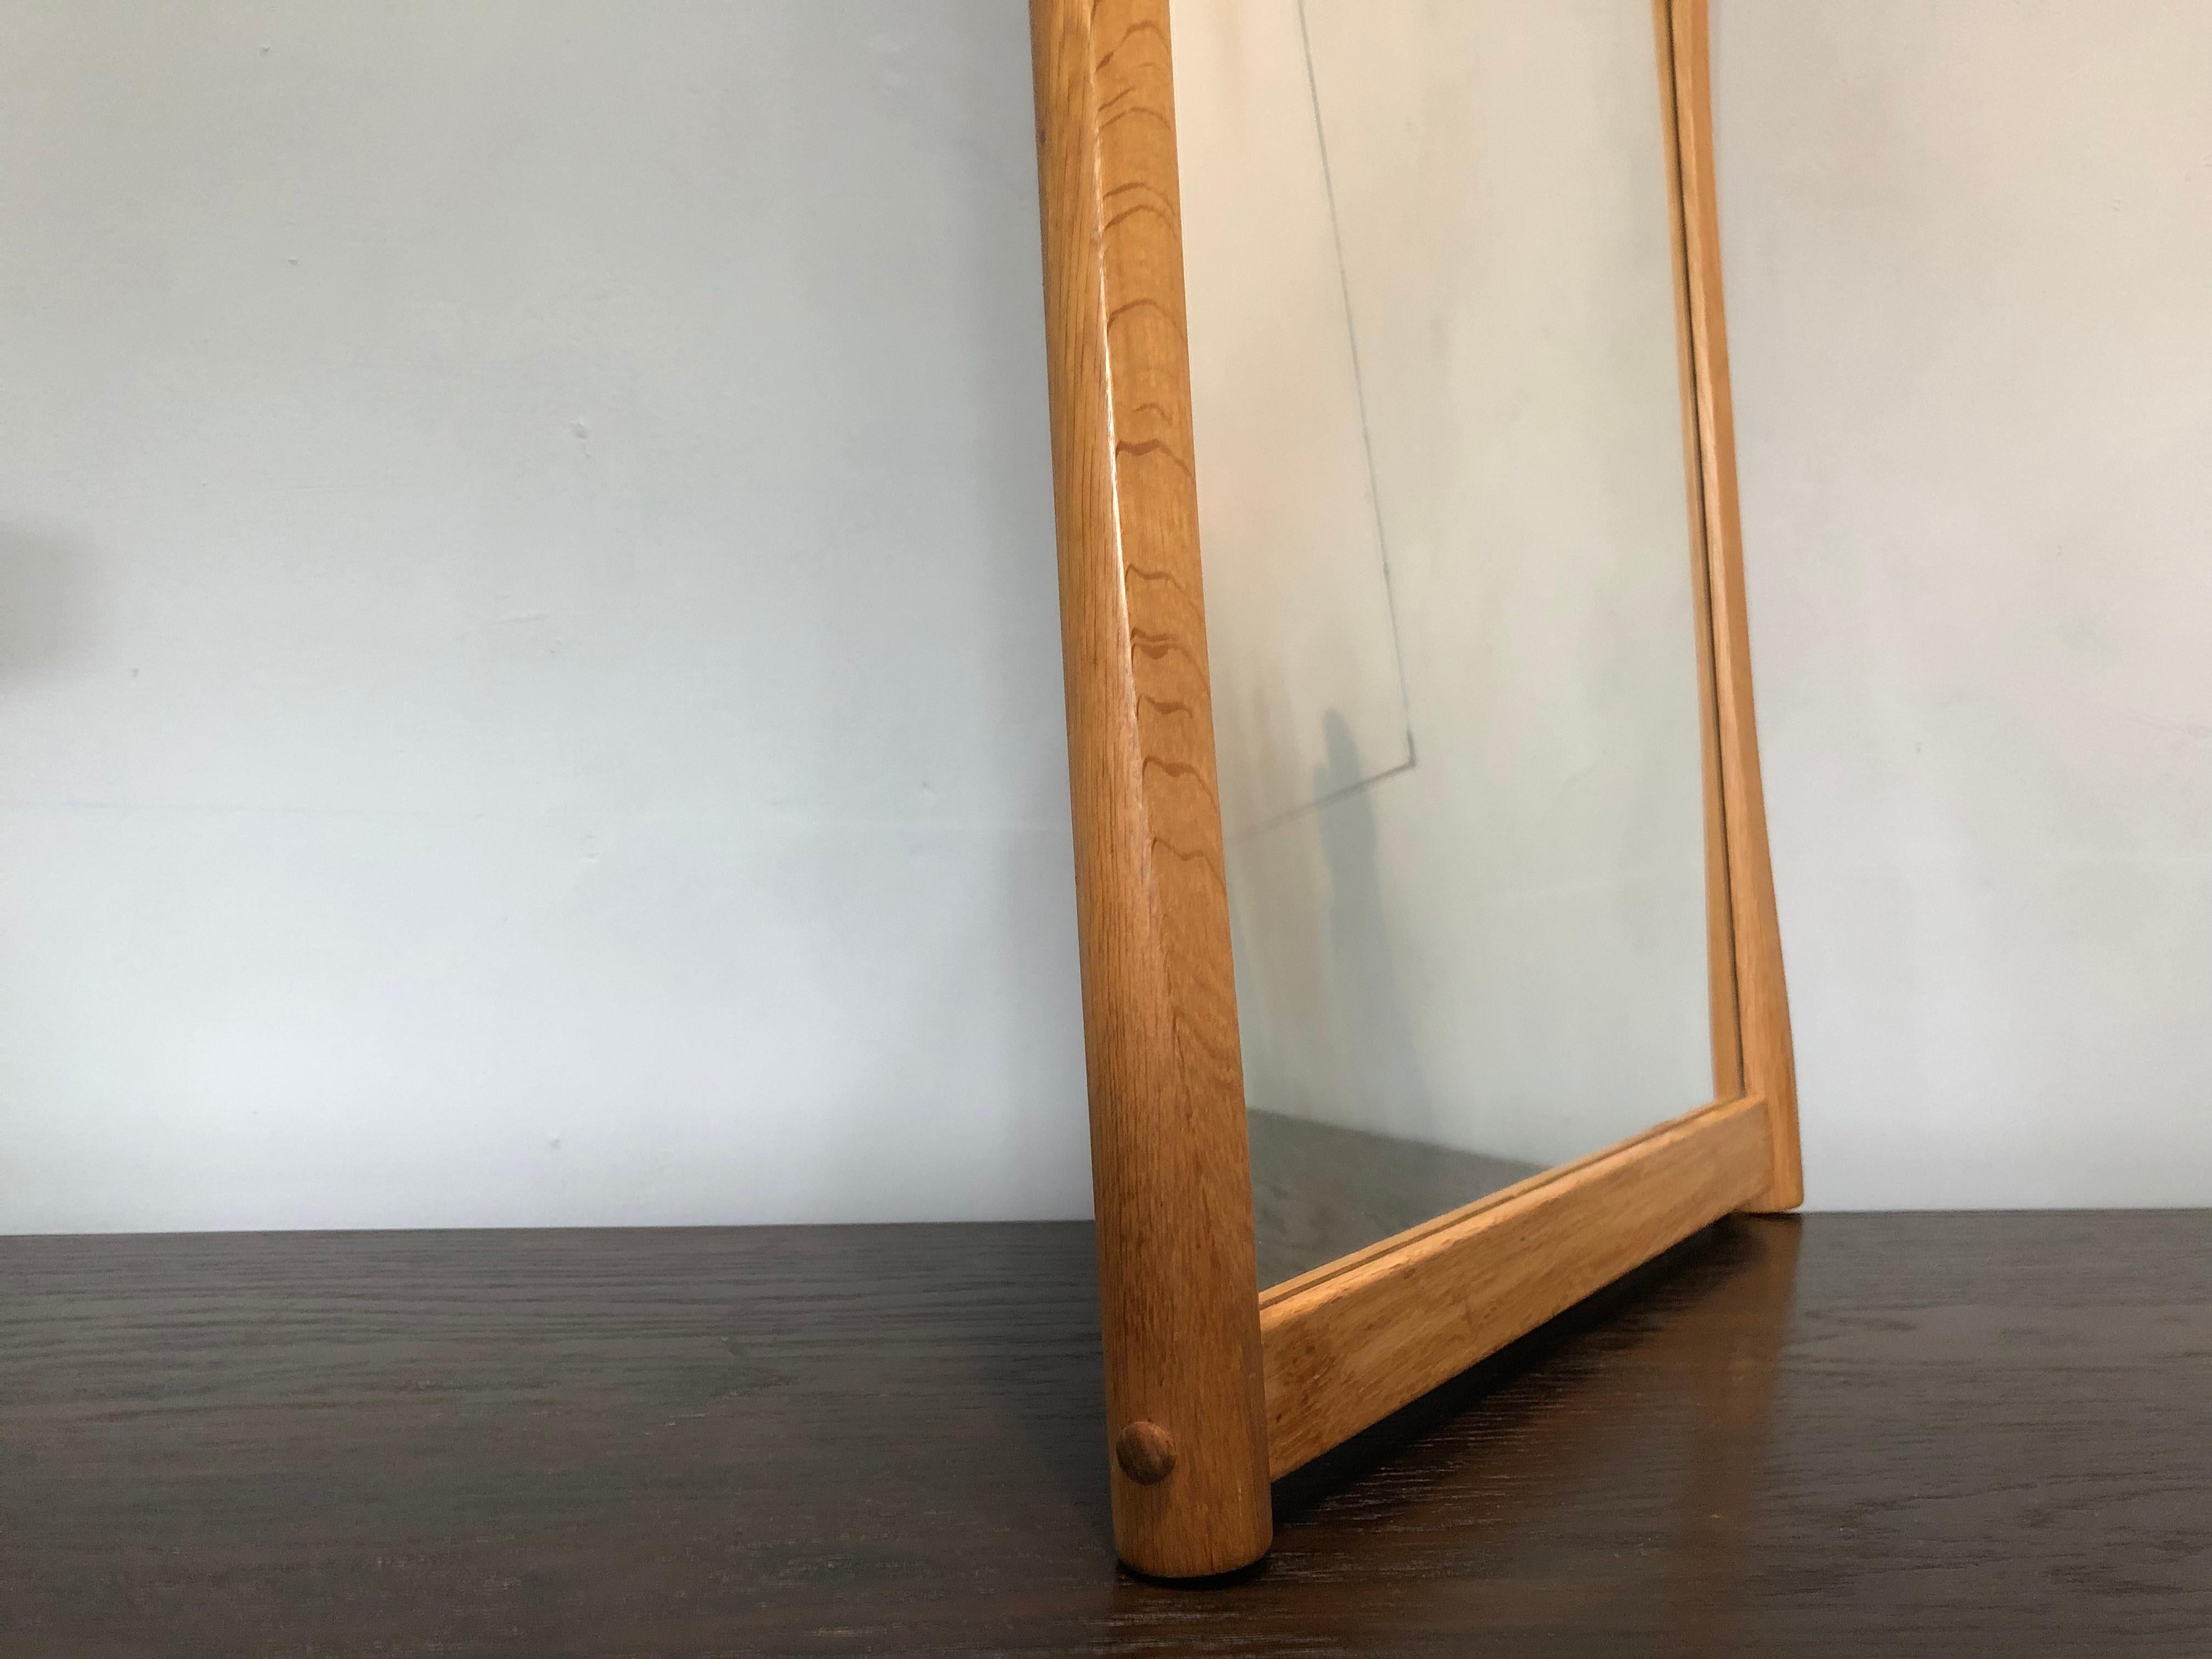 Typically stylish design from Aksel Kjersgaard. Wonderful hardwood oak frame. In excellent condition.
Produced by Odder, Denmark, circa 1960.